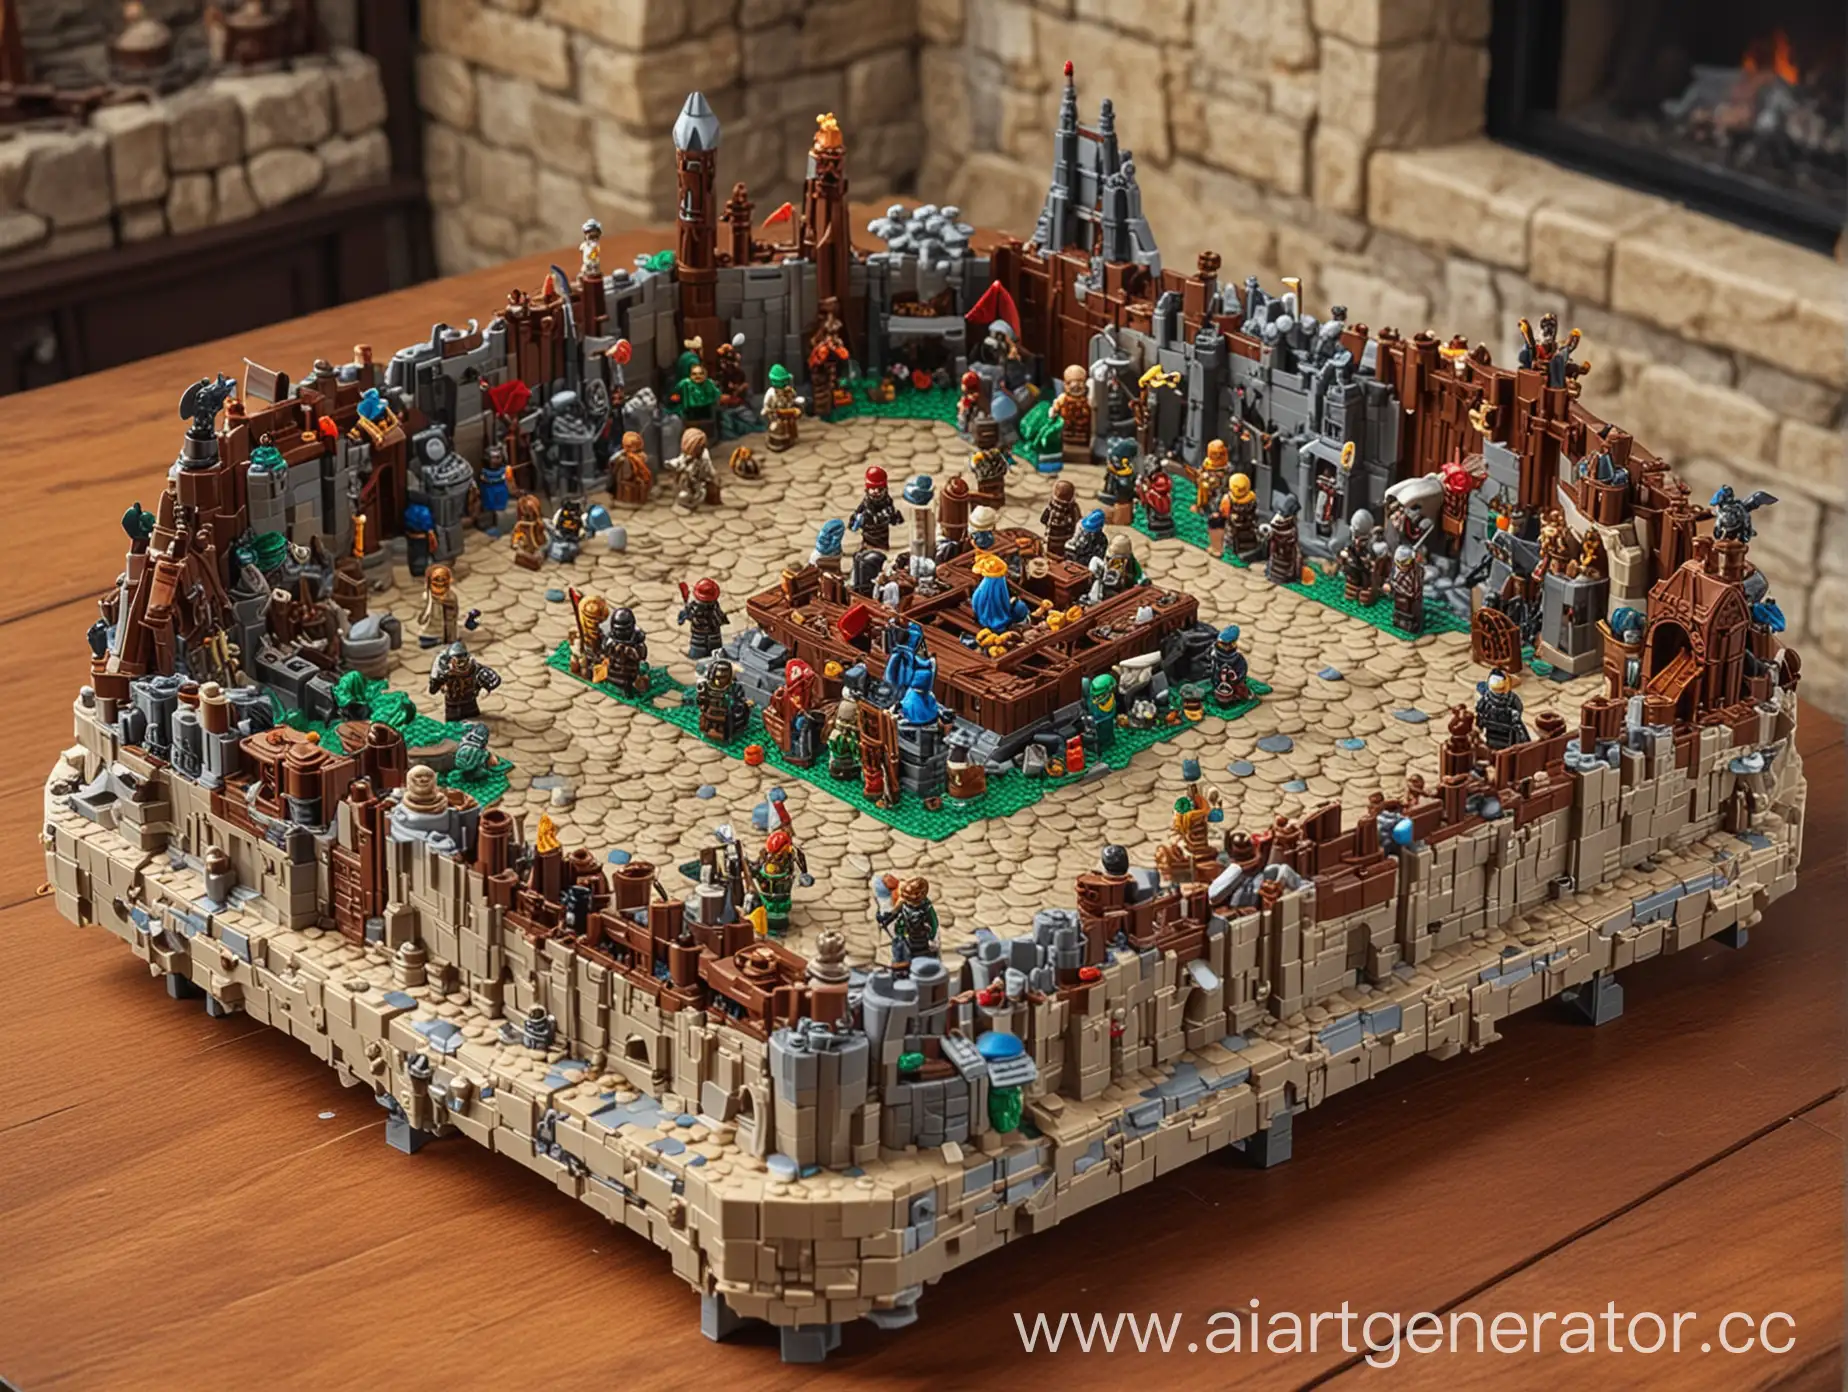 Dungeons-Dragons-Lego-Tabletop-Miniature-Figurines-and-Decorations